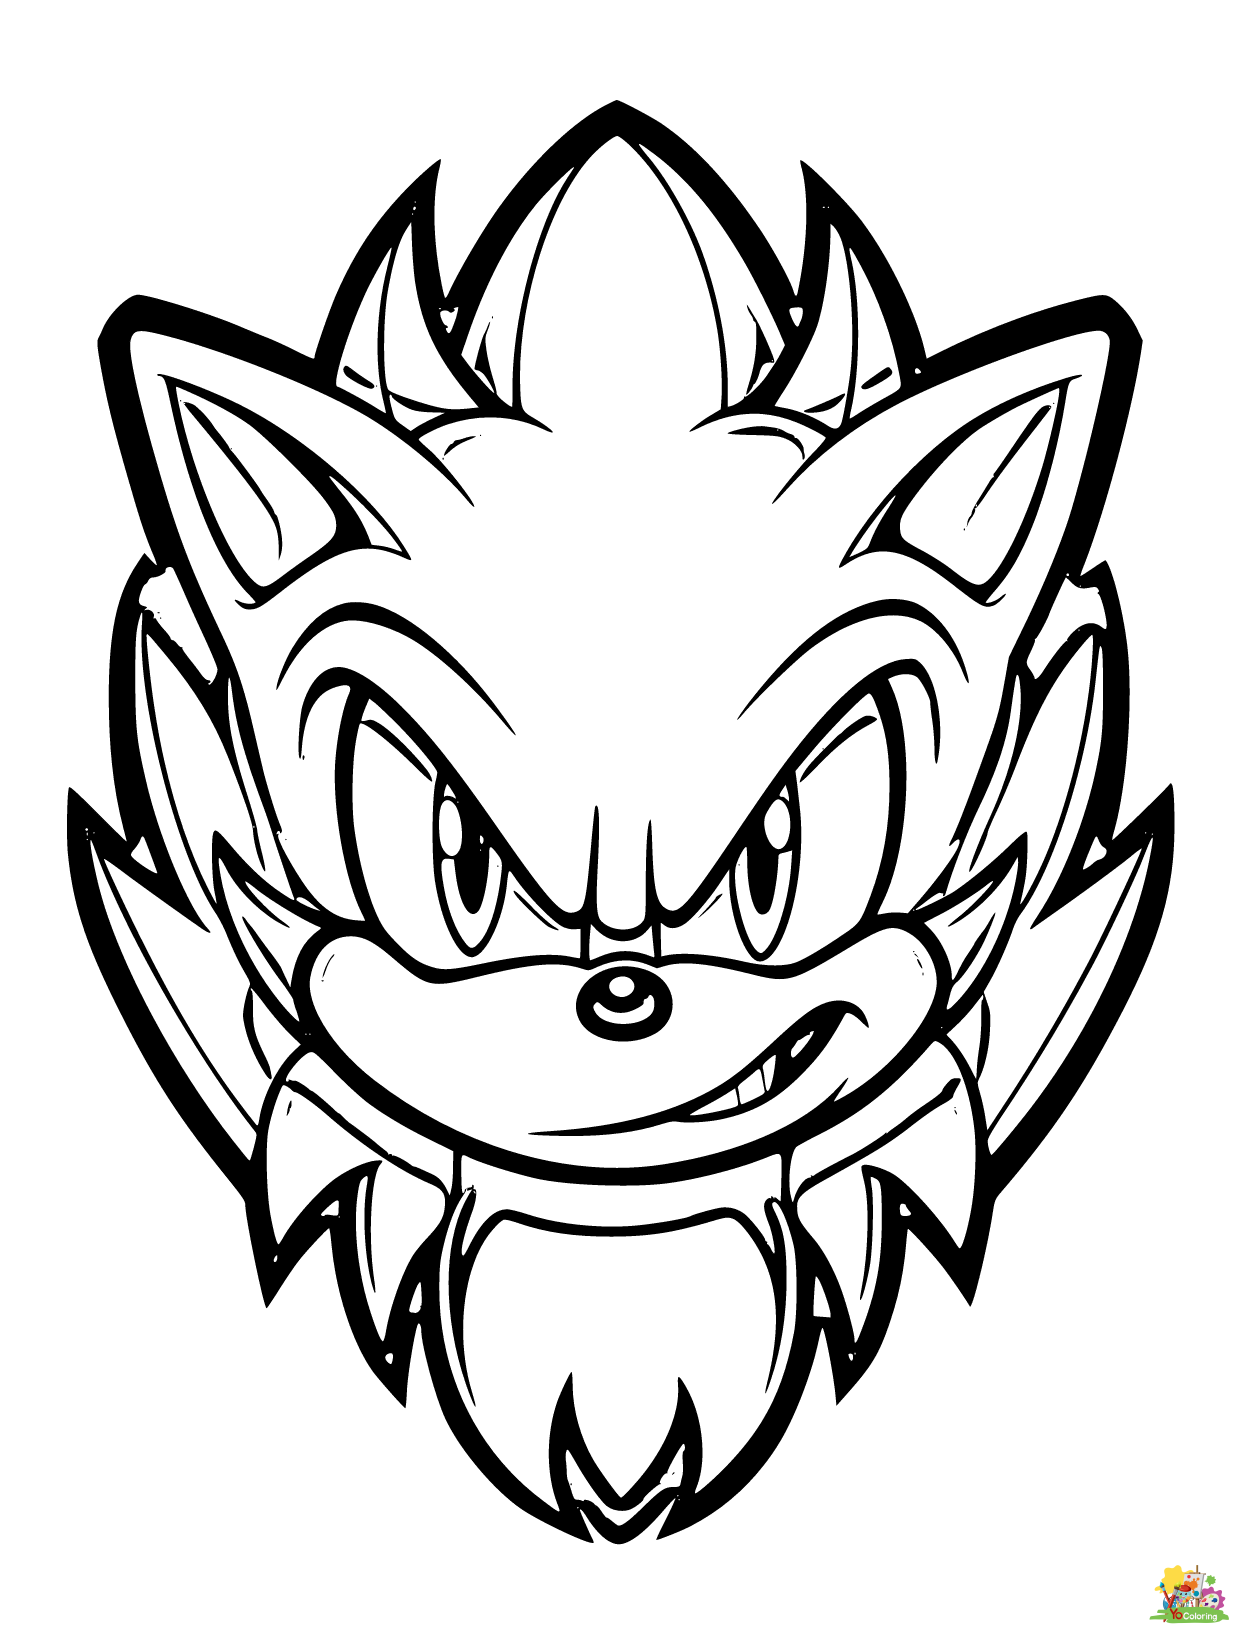 Dark Sonic coloring page – Having fun with children